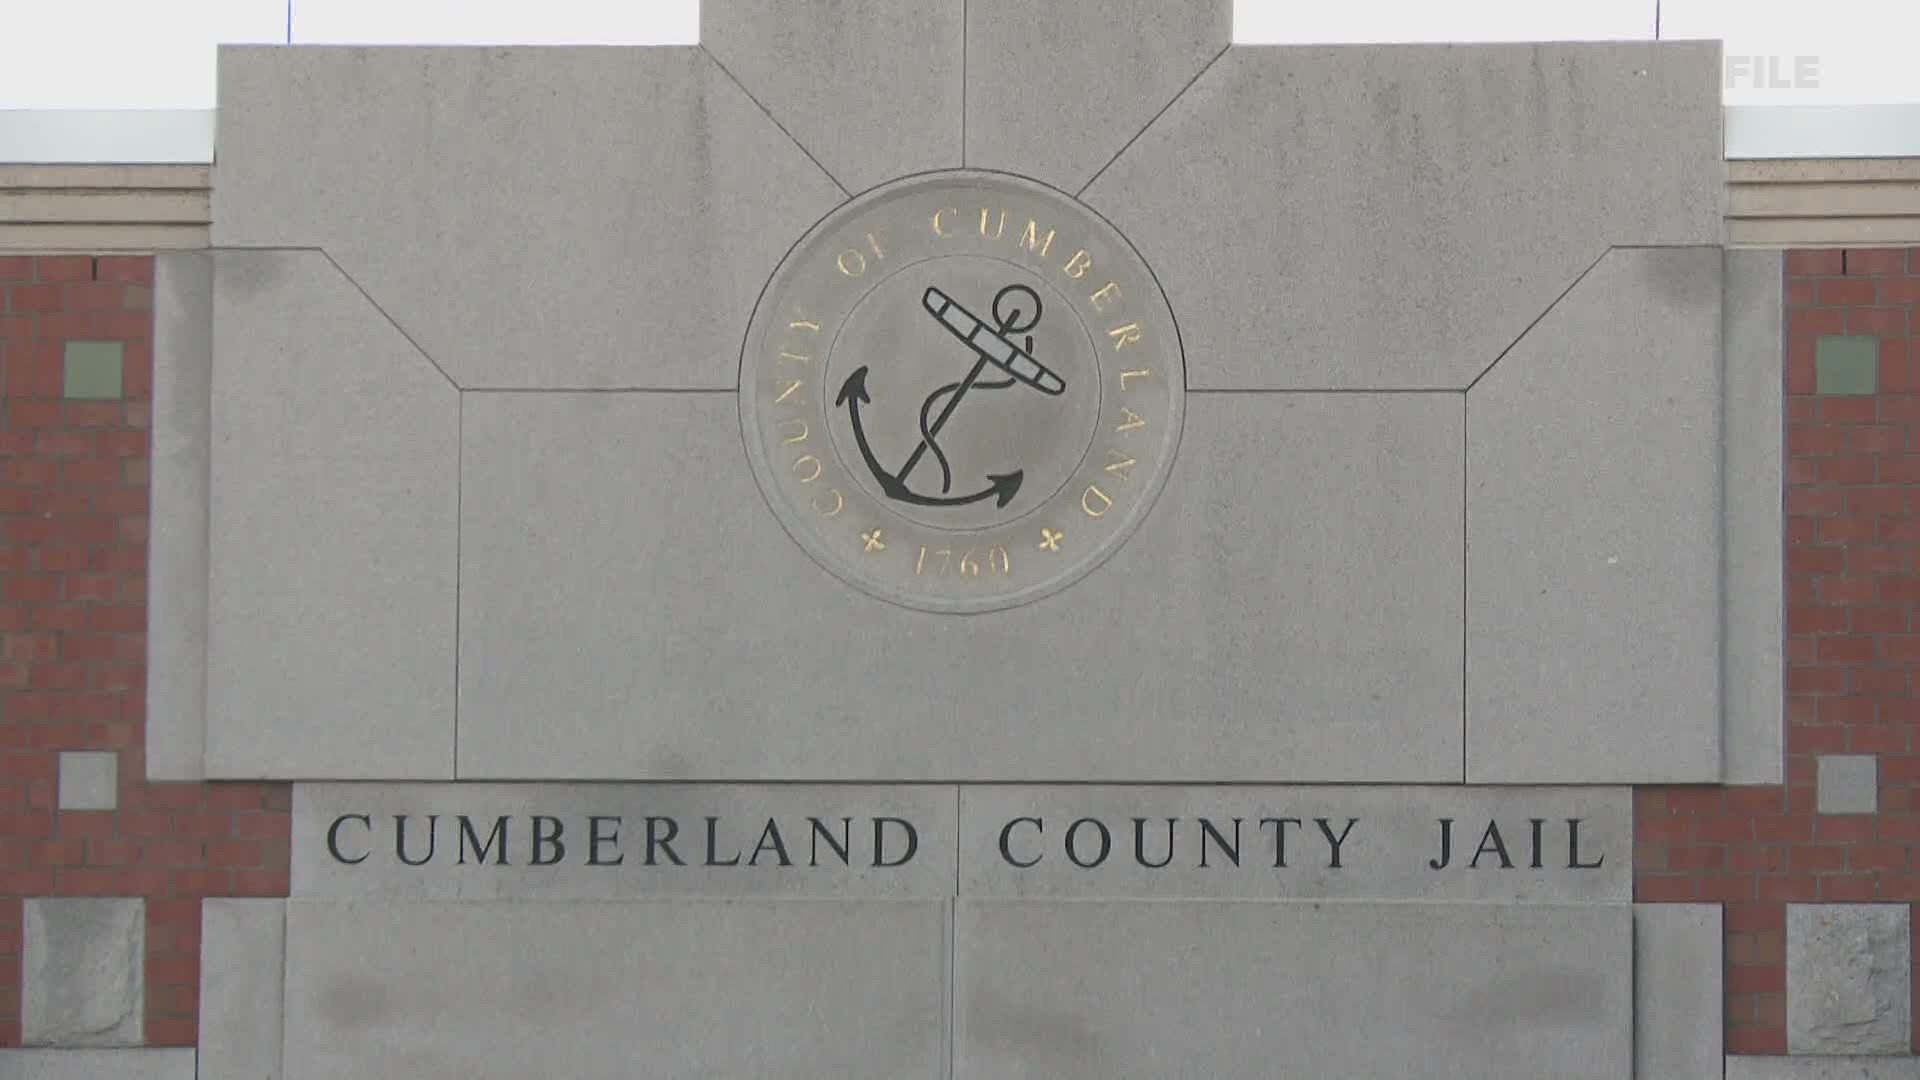 An inmate at the Cumberland County Jail has tested positive for COVID-19.